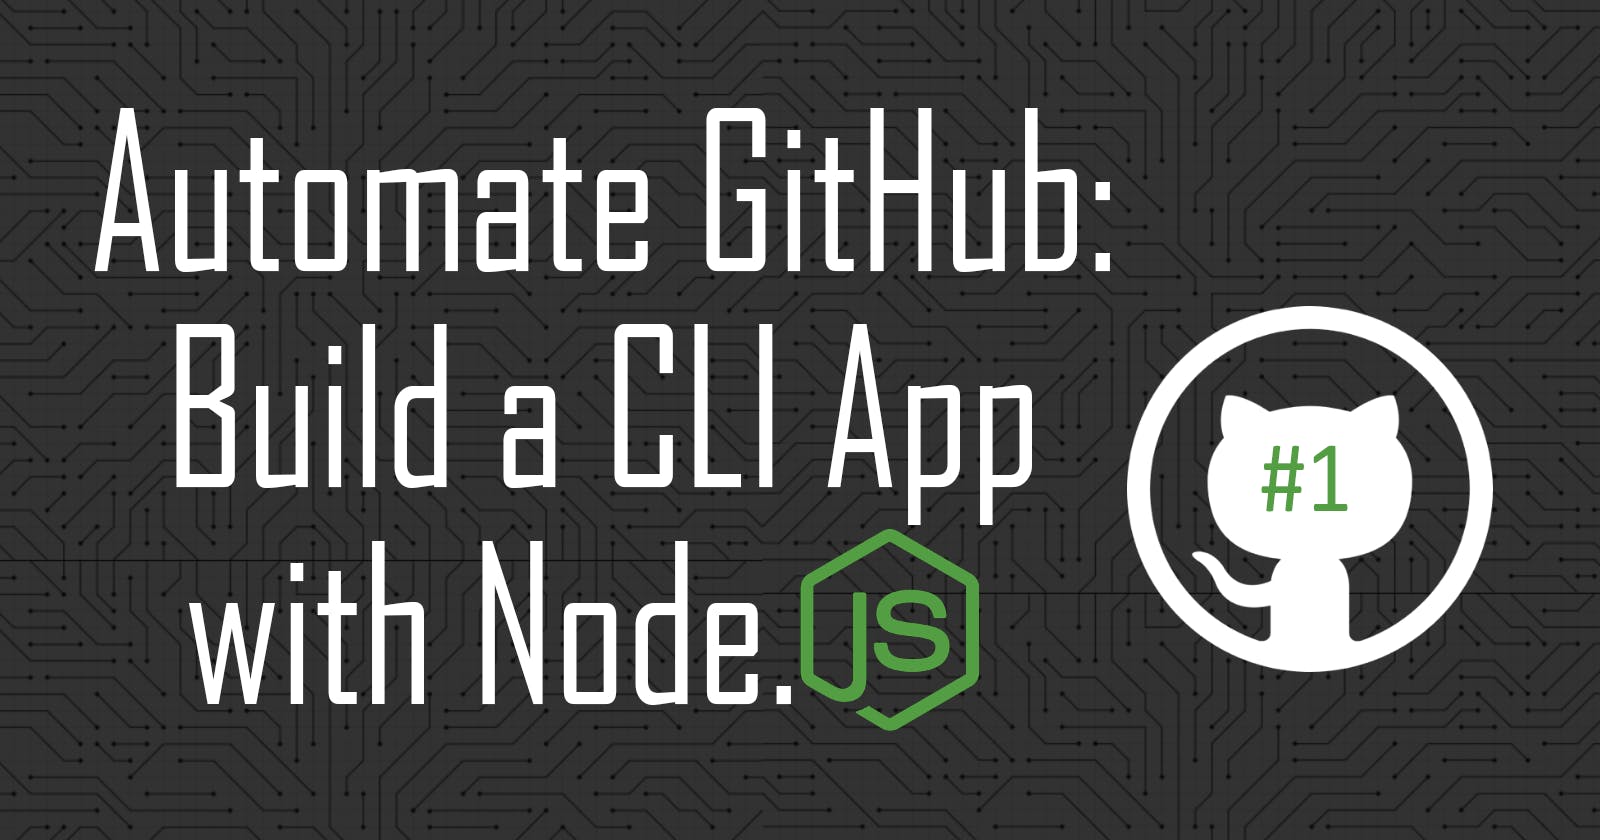 Automate GitHub: Build a CLI App with Node.js #1